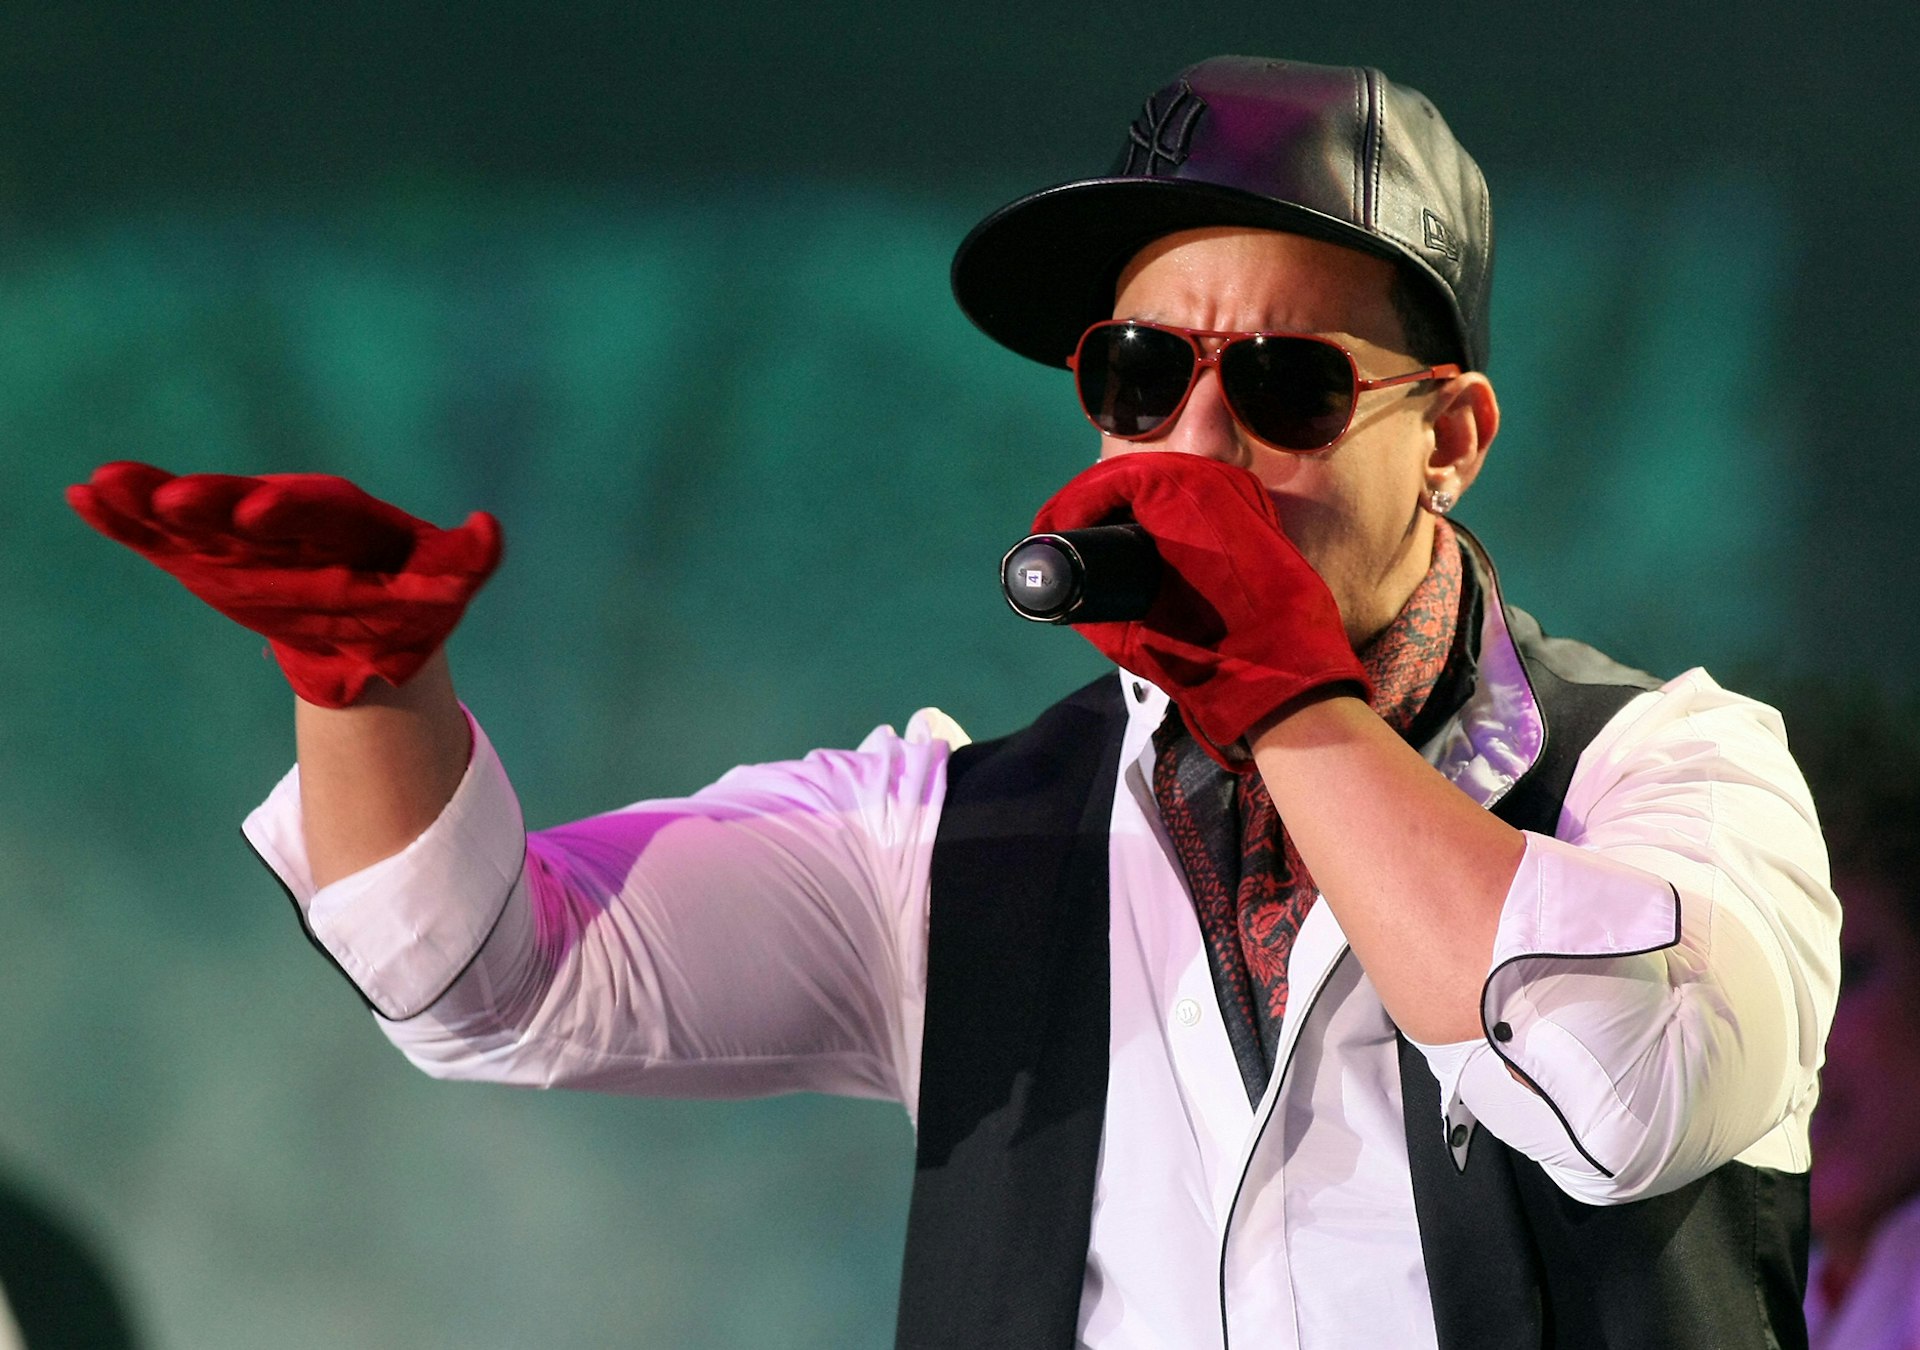 Reggaeton musician Daddy Yankee performs on stage. He's wearing red gloves, black leather baseball cap, a white button-up and black vest.  